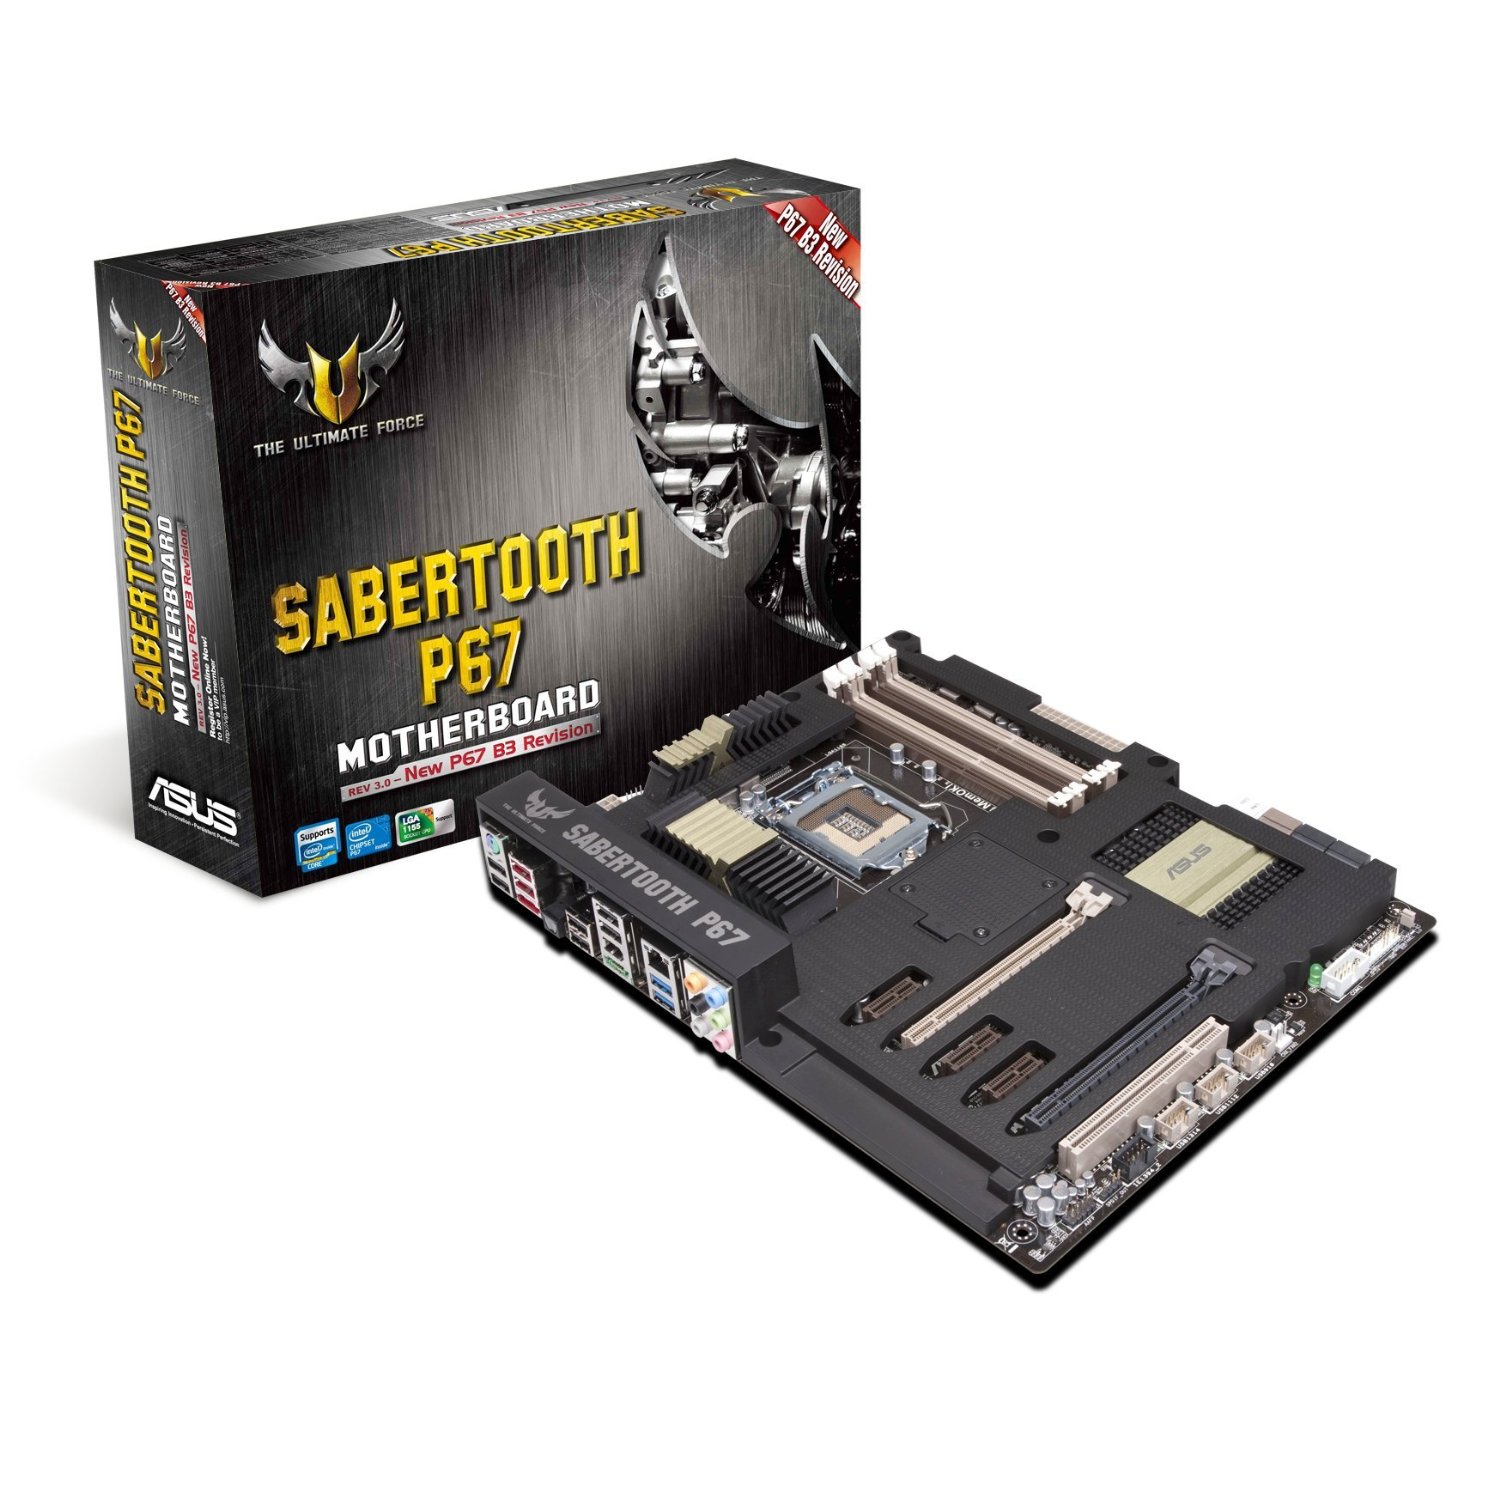 http://thetechjournal.com/wp-content/uploads/images/1108/1313504264-asus-sabertooth-p67-lga-1155-sata-6gbps-and-usb-30-supported-1800-atx-motherboard-1.jpg